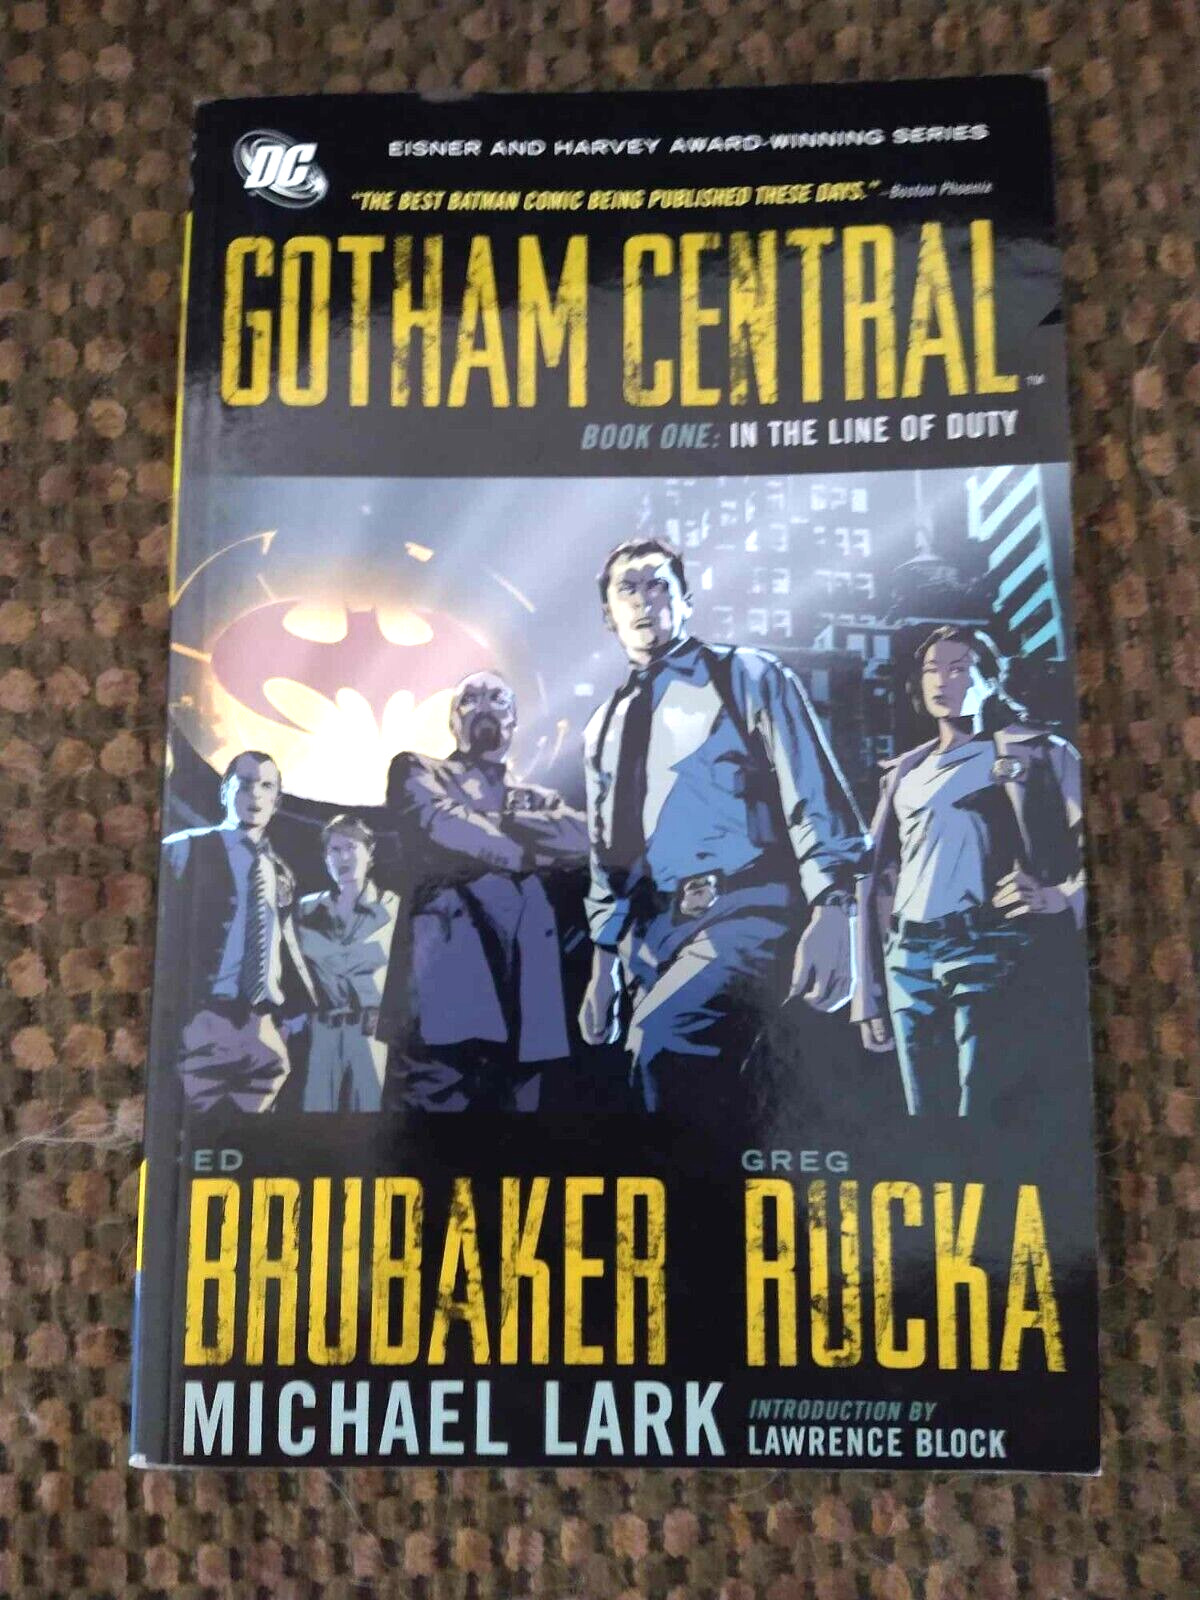 Gotham Central by Ed Brubaker Vol 1 In the Line of Duty Graphic Novel Trade DC